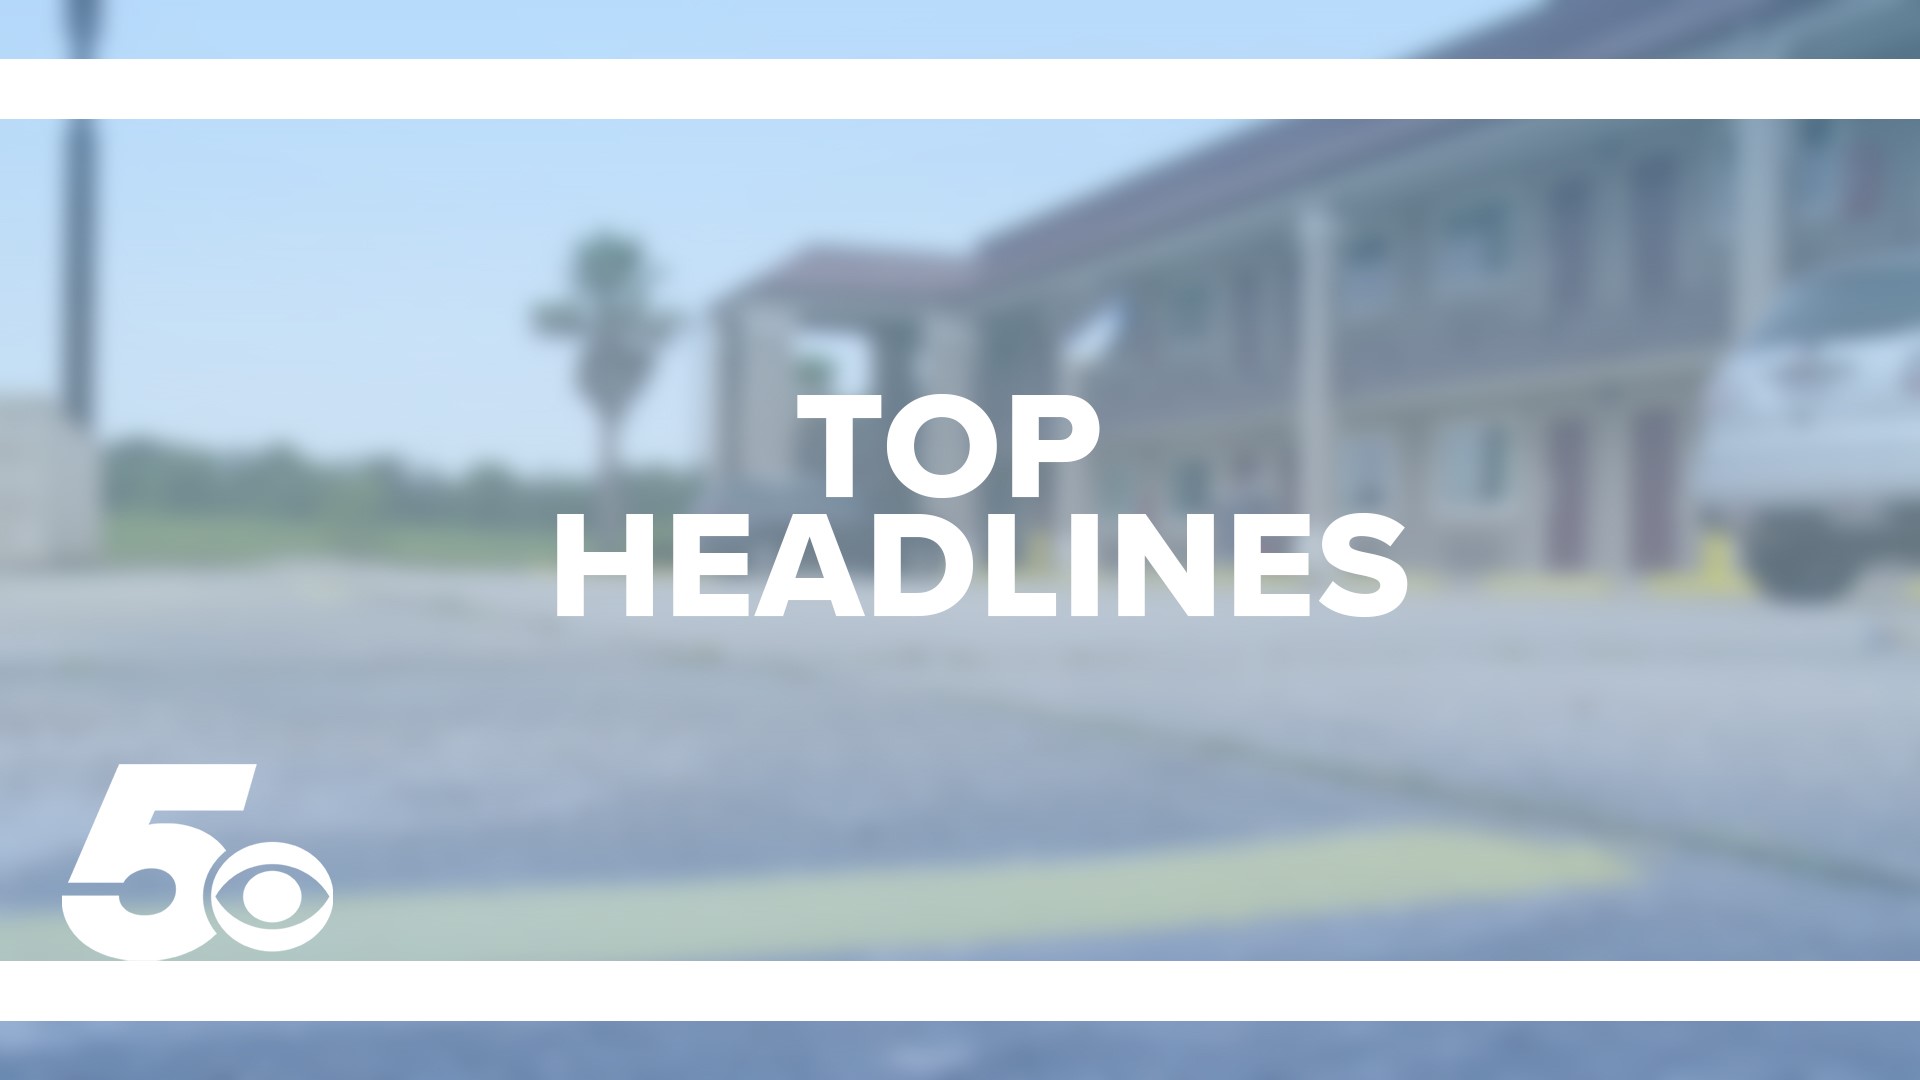 Take a look at today's top headlines for local news across Northwest Arkansas and the River Valley! 📰